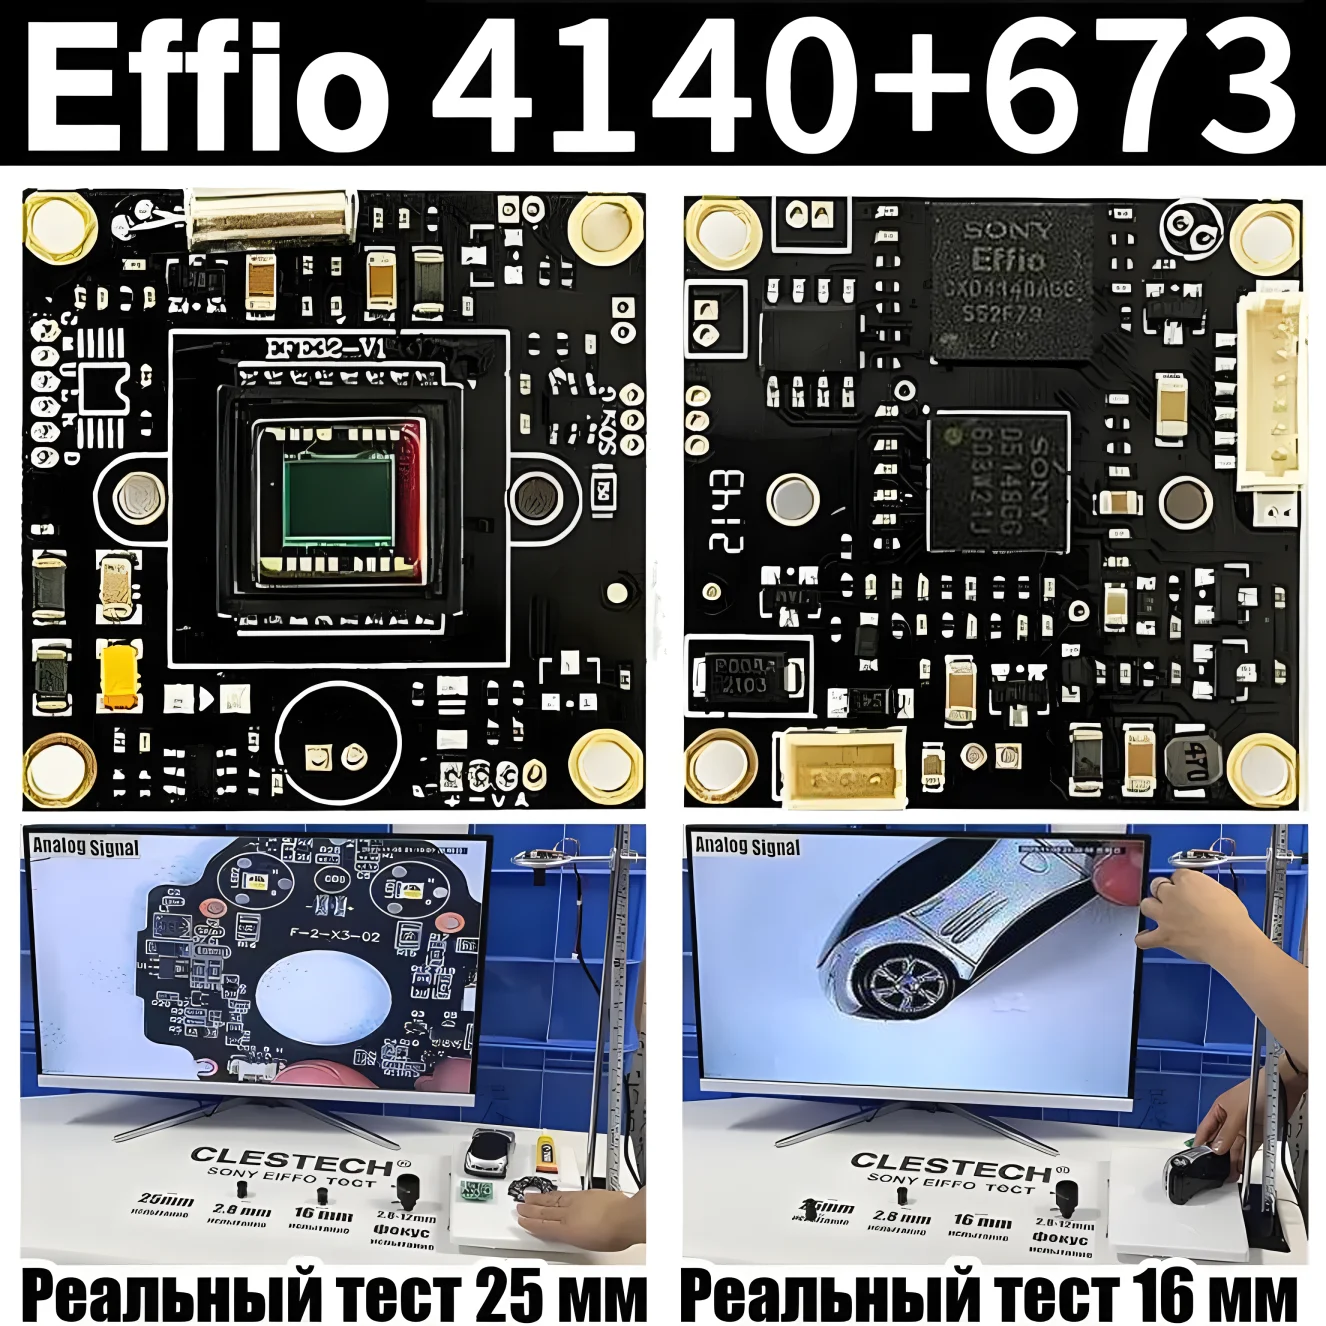 CLESTECH Camera Module Sony Effio CCD 4140+673 800TVL Chip Circuit Board HD CCTV Analog 960H OSD Cable Microscope DIY Monitoring clestech camera module sony effio ccd 4140 673 800tvl chip circuit board hd cctv analog 960h osd cable microscope diy monitoring